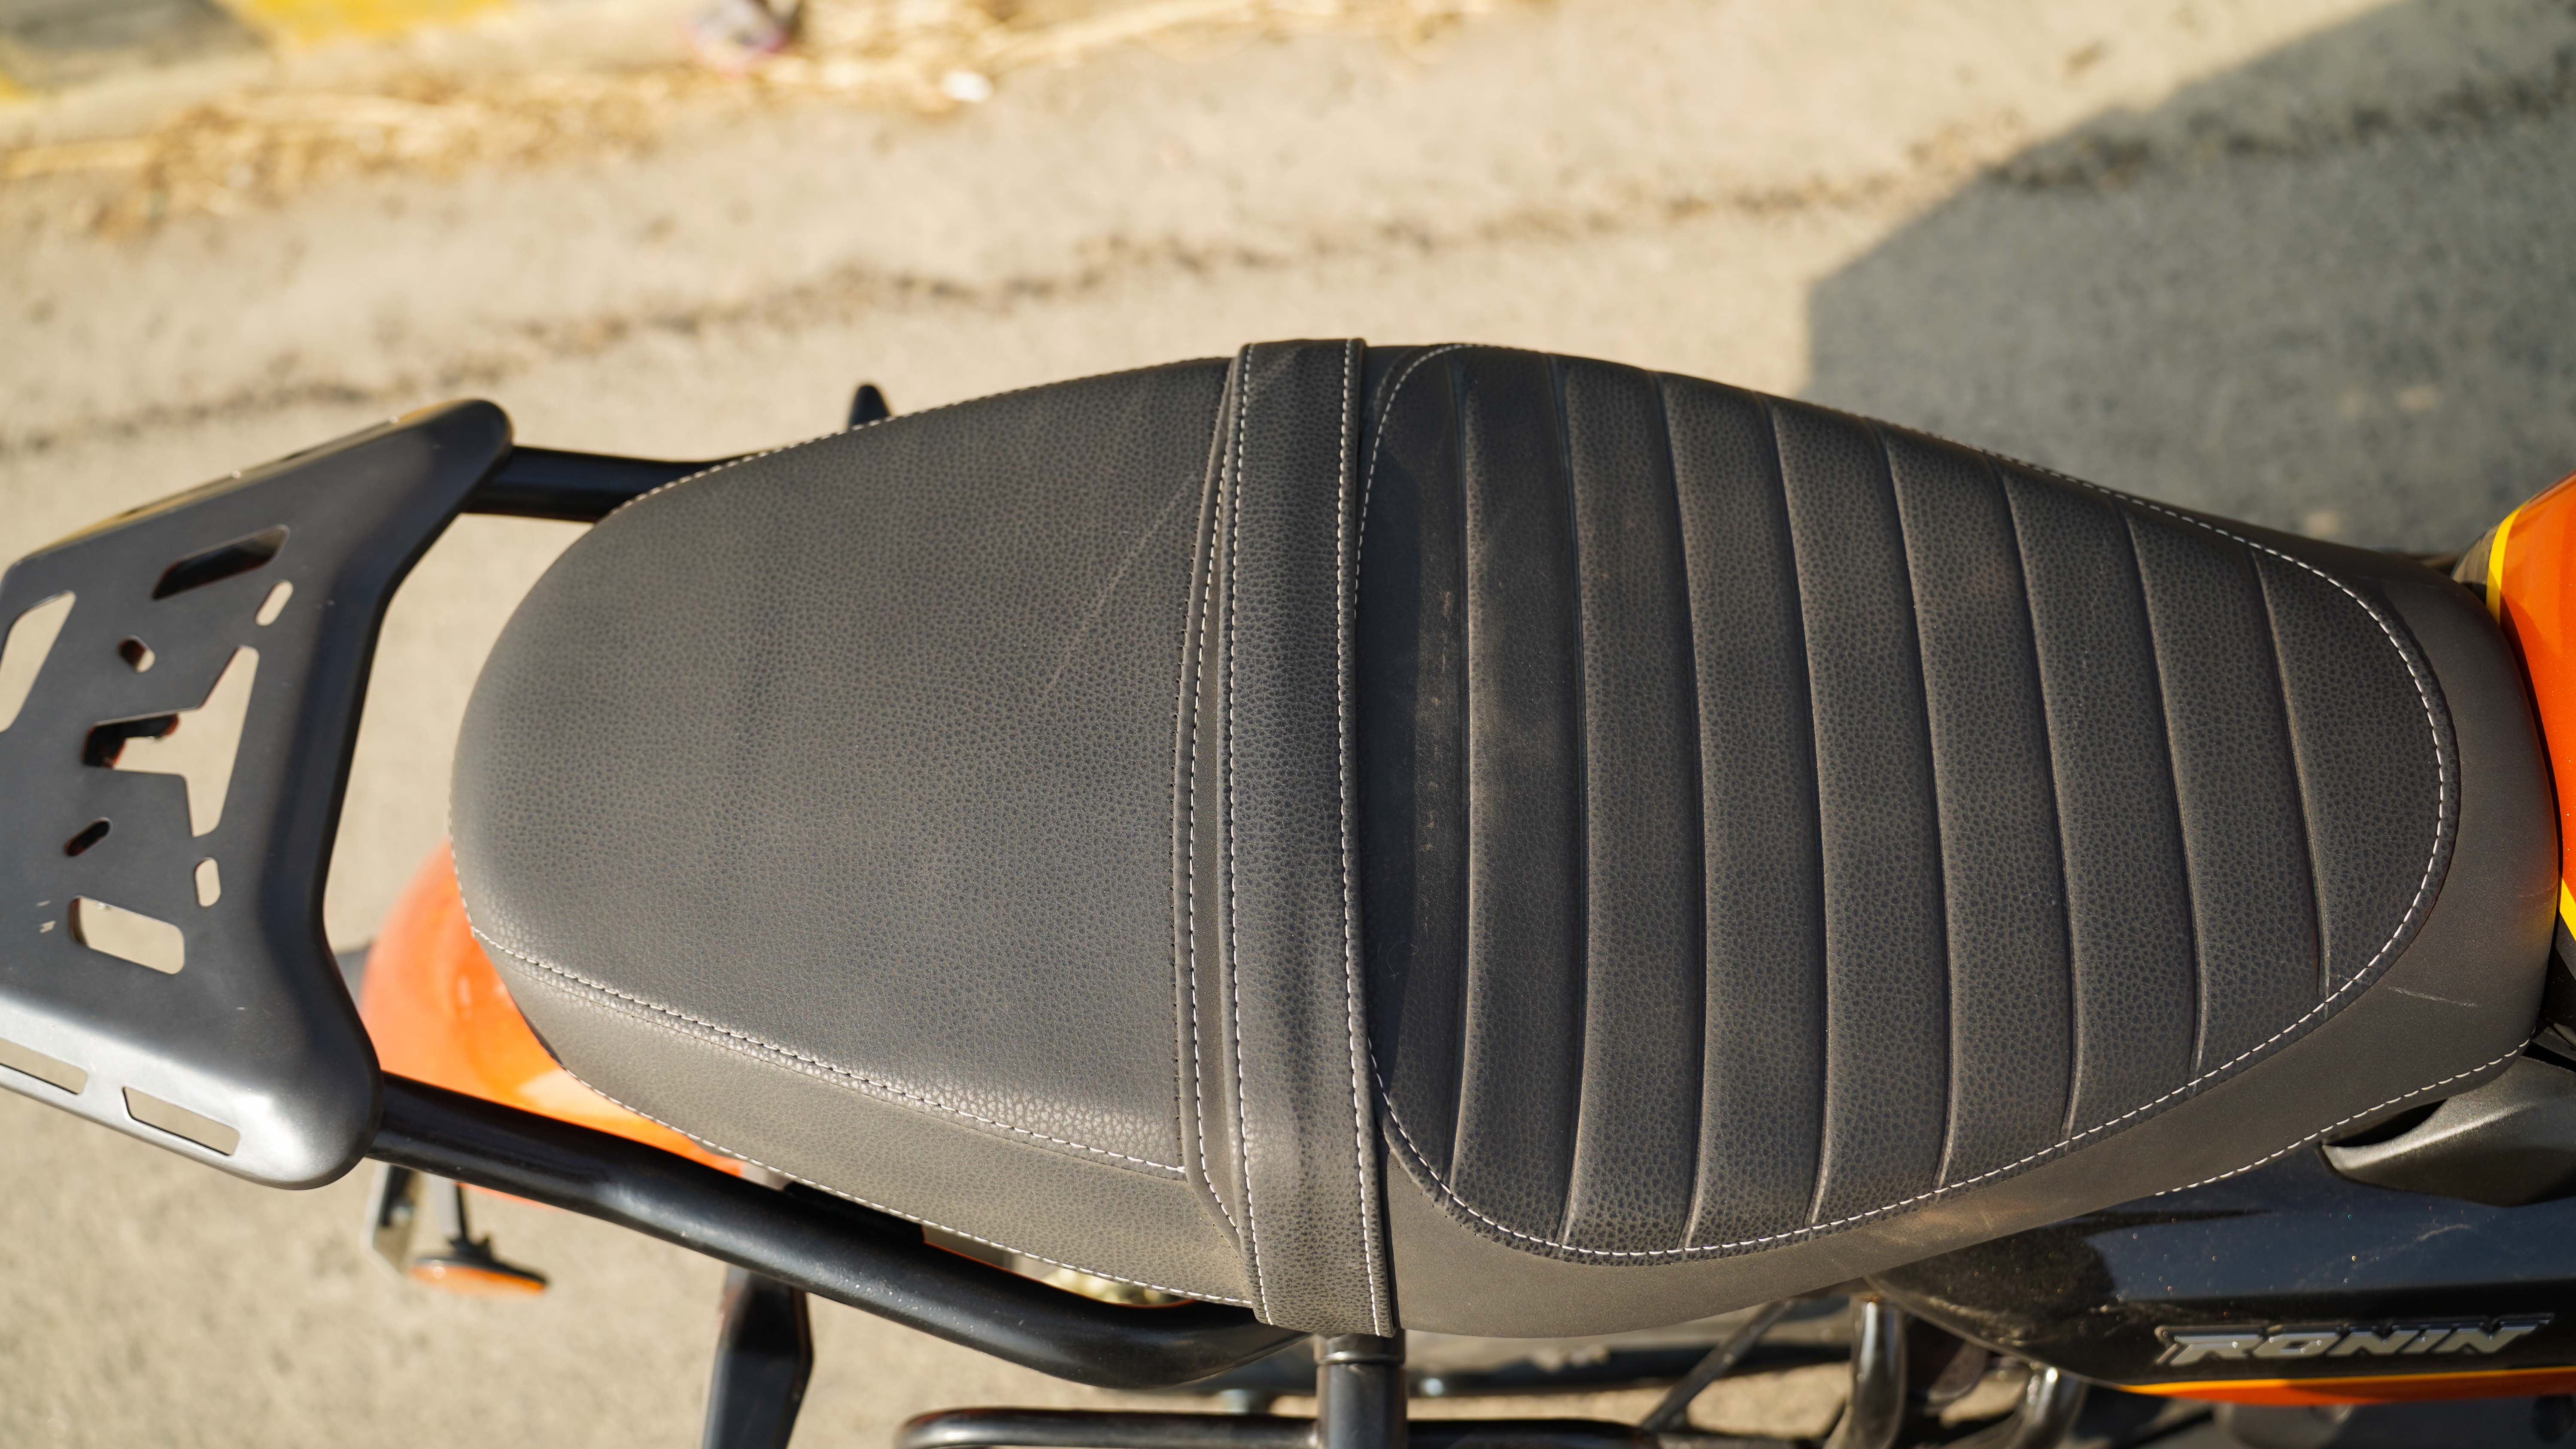 Tuck and Roll Seat in TVS Ronin 225